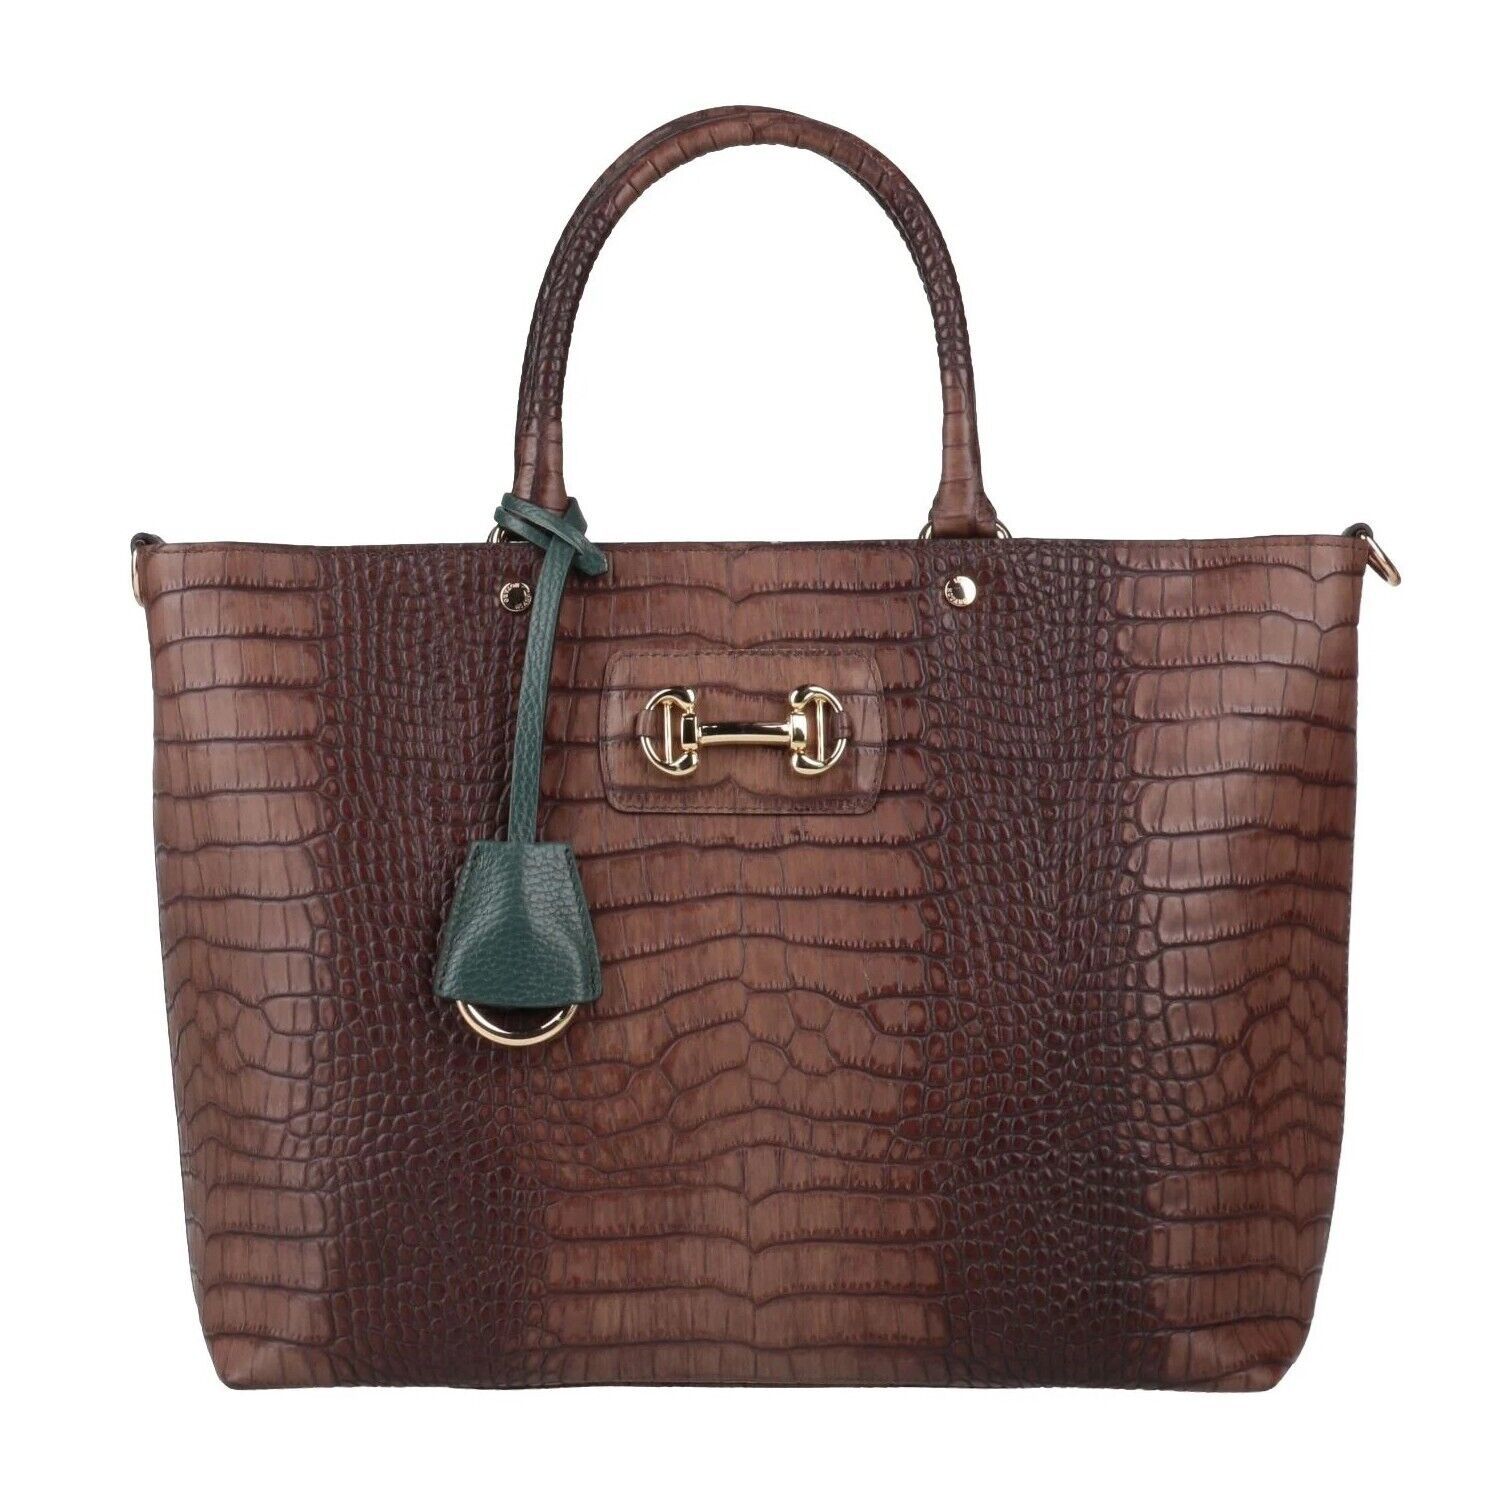 Primary image for Gianni Notaro Italian Made Brown Crocodile Embossed Leather Large Tote Handbag